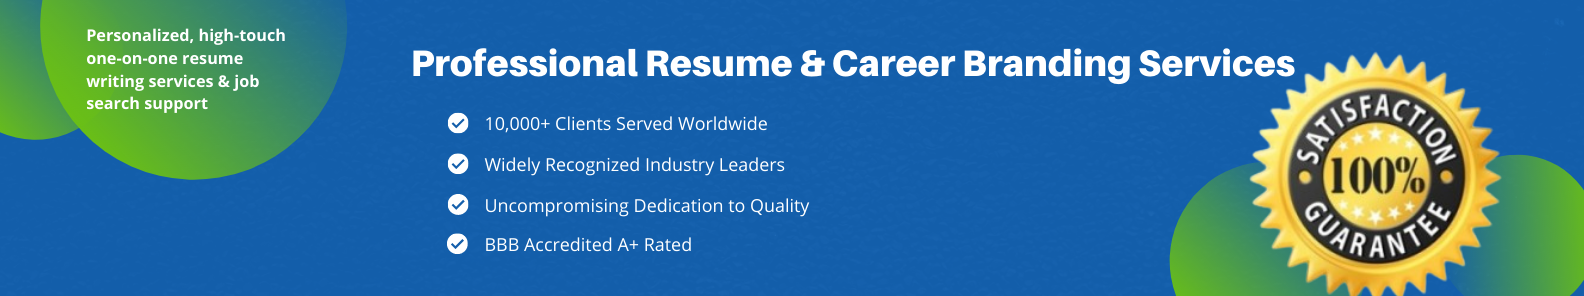 Professional Resume Writing Services Banner